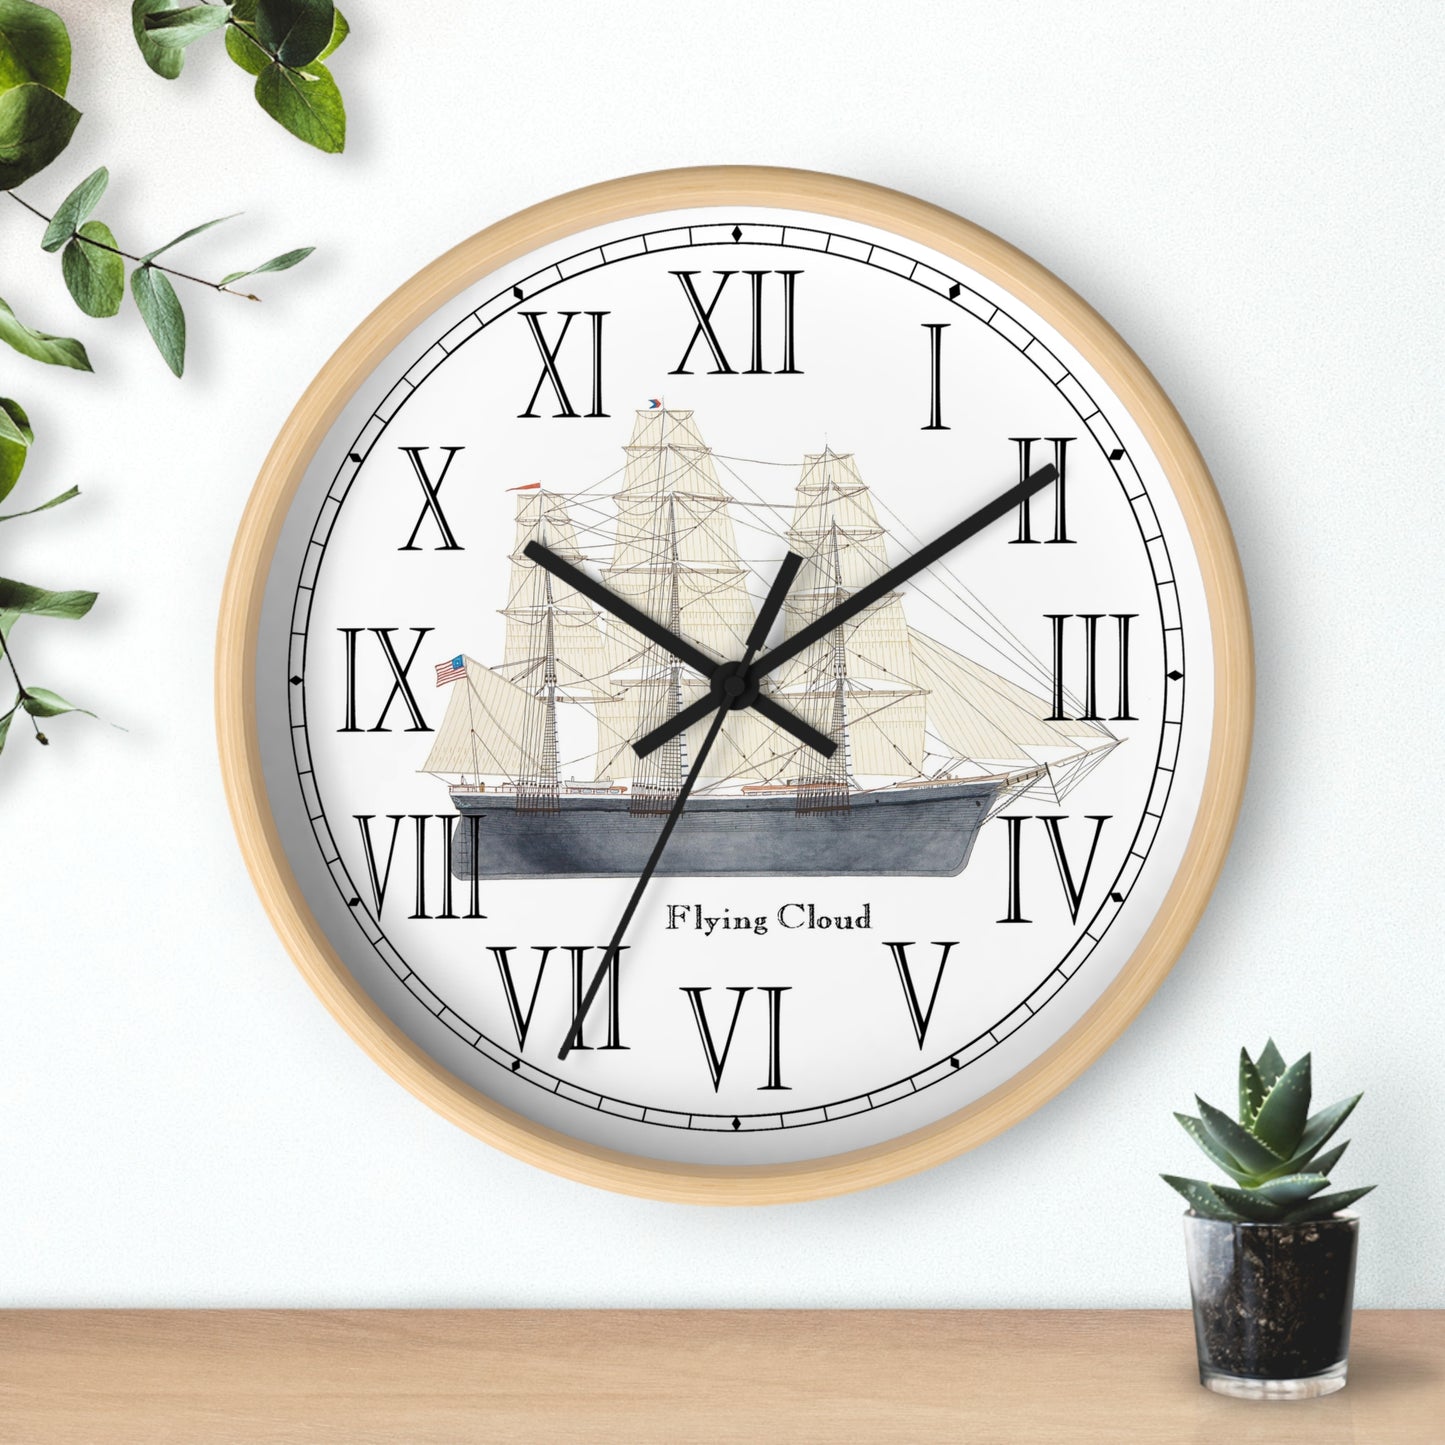 The Clipper Flying Cloud Roman Numeral Clock will add a classic touch to any room. IT's a great gift idea for anyone who loves sailing  or naval history.